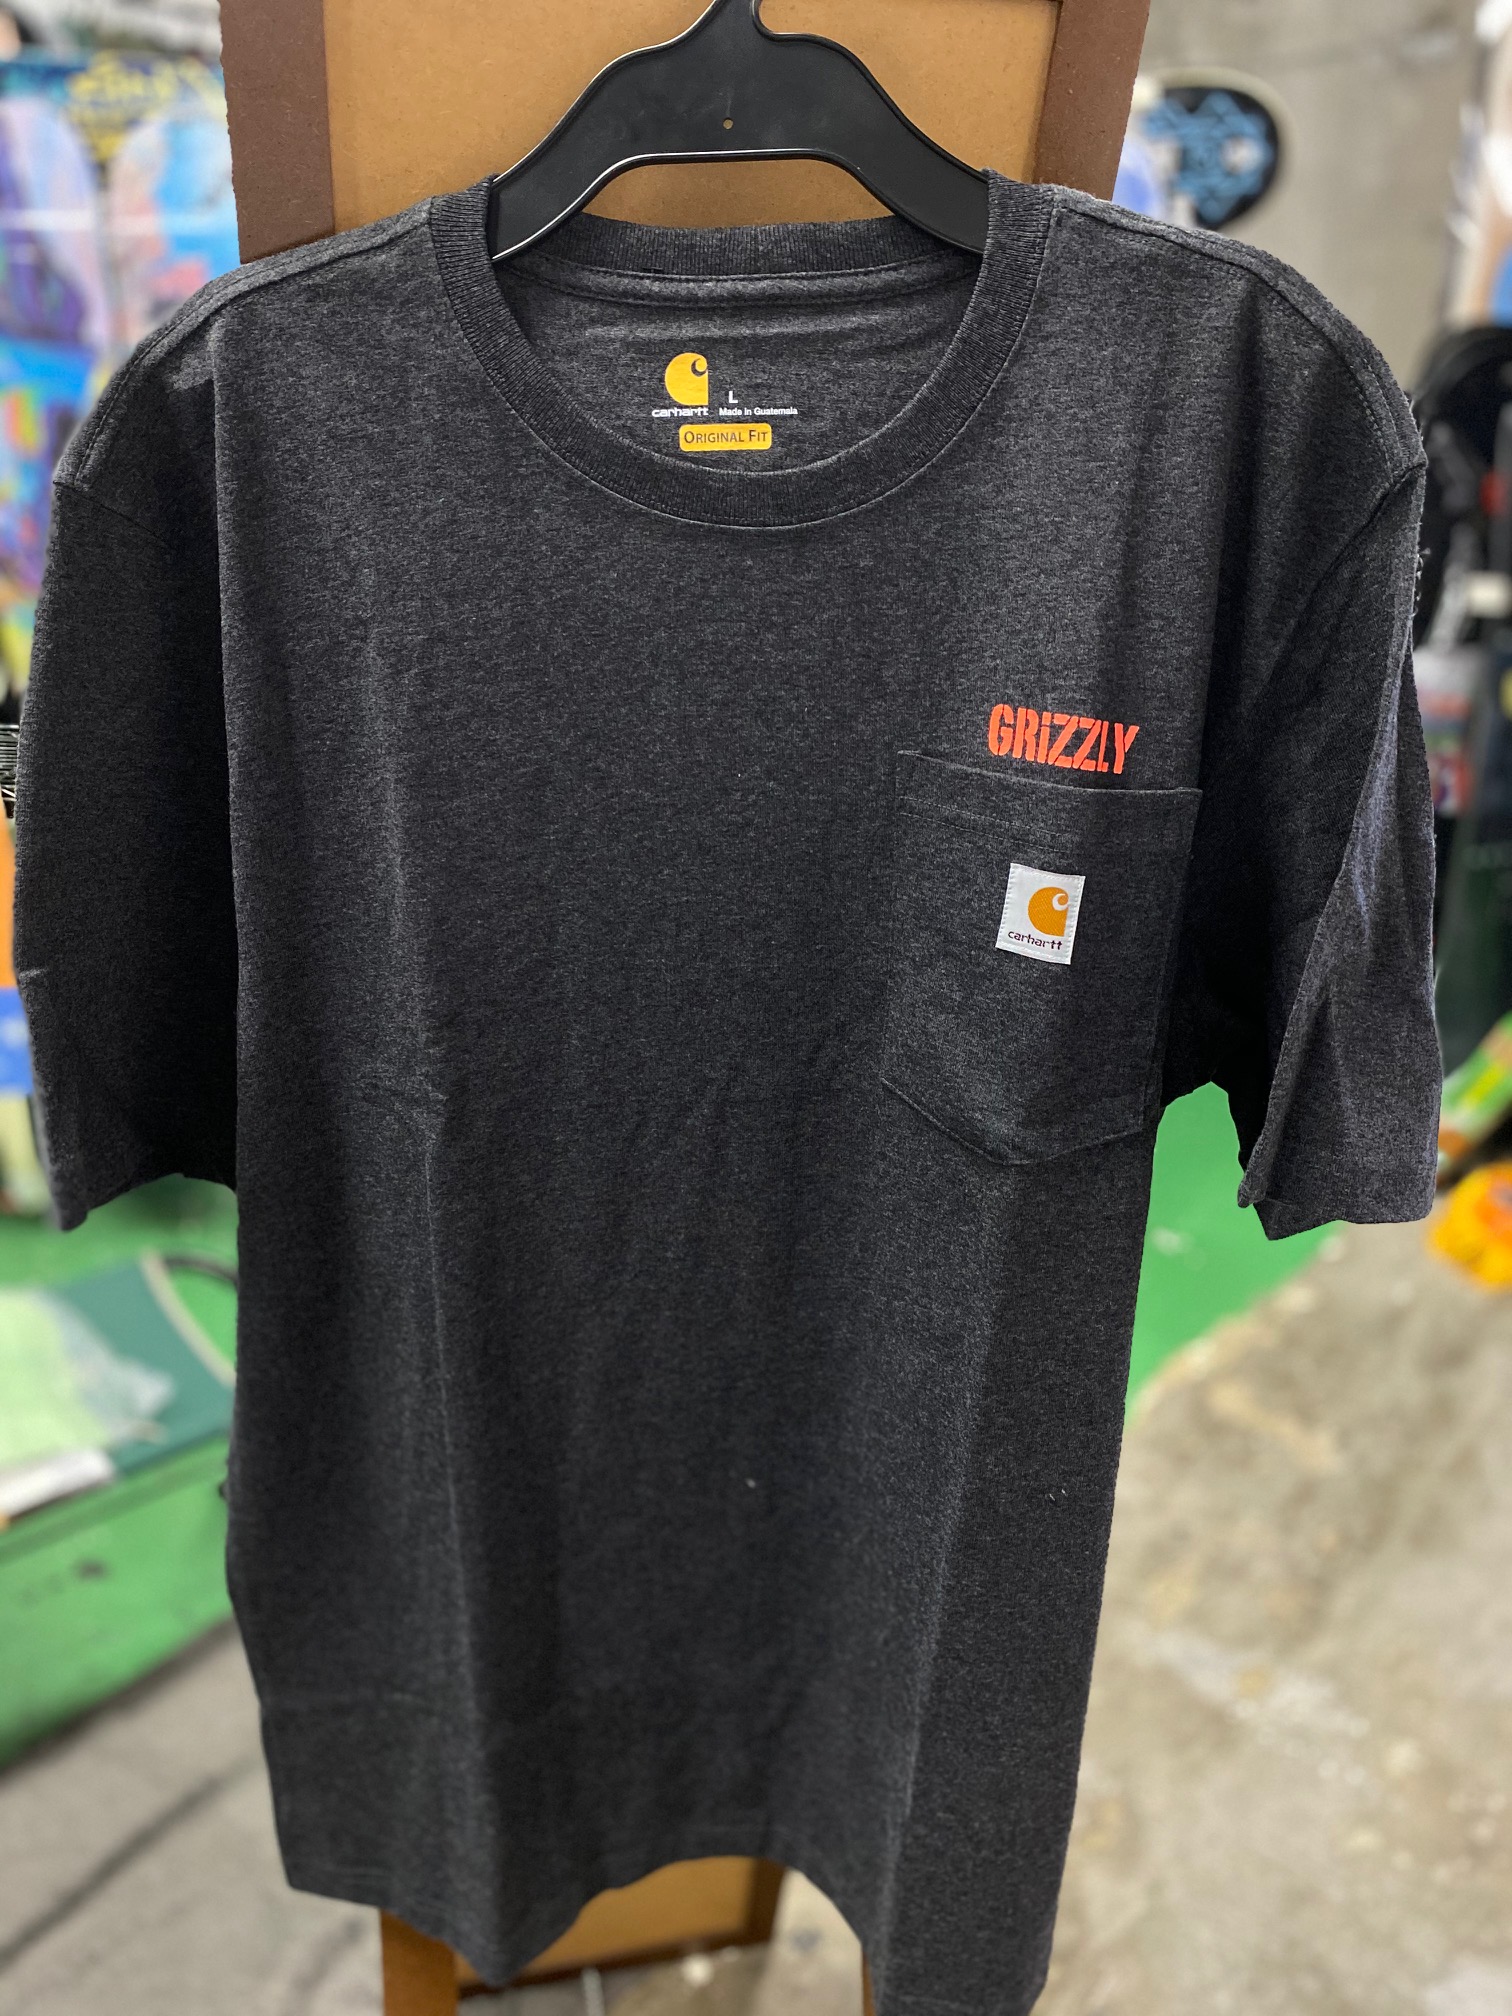 GRIZZLY × carhartt 激レアコラボモデル、GRIZZLY 2020SPRING 入荷しました！！